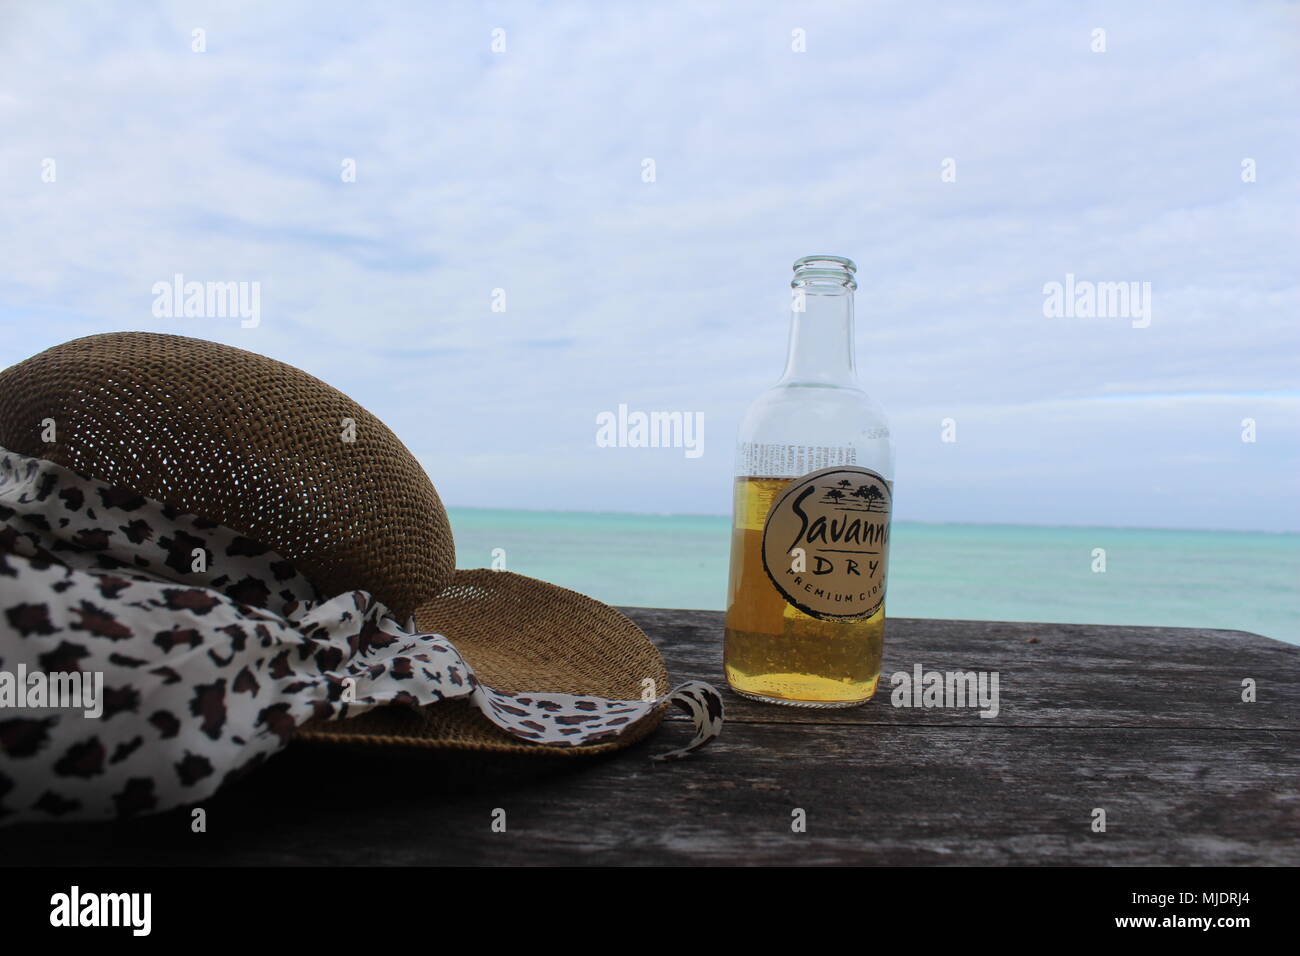 Savannah Dry apple cider and a beach hat on a table with clear blue water sea in the background. Zanzibar, Tanzania Stock Photo